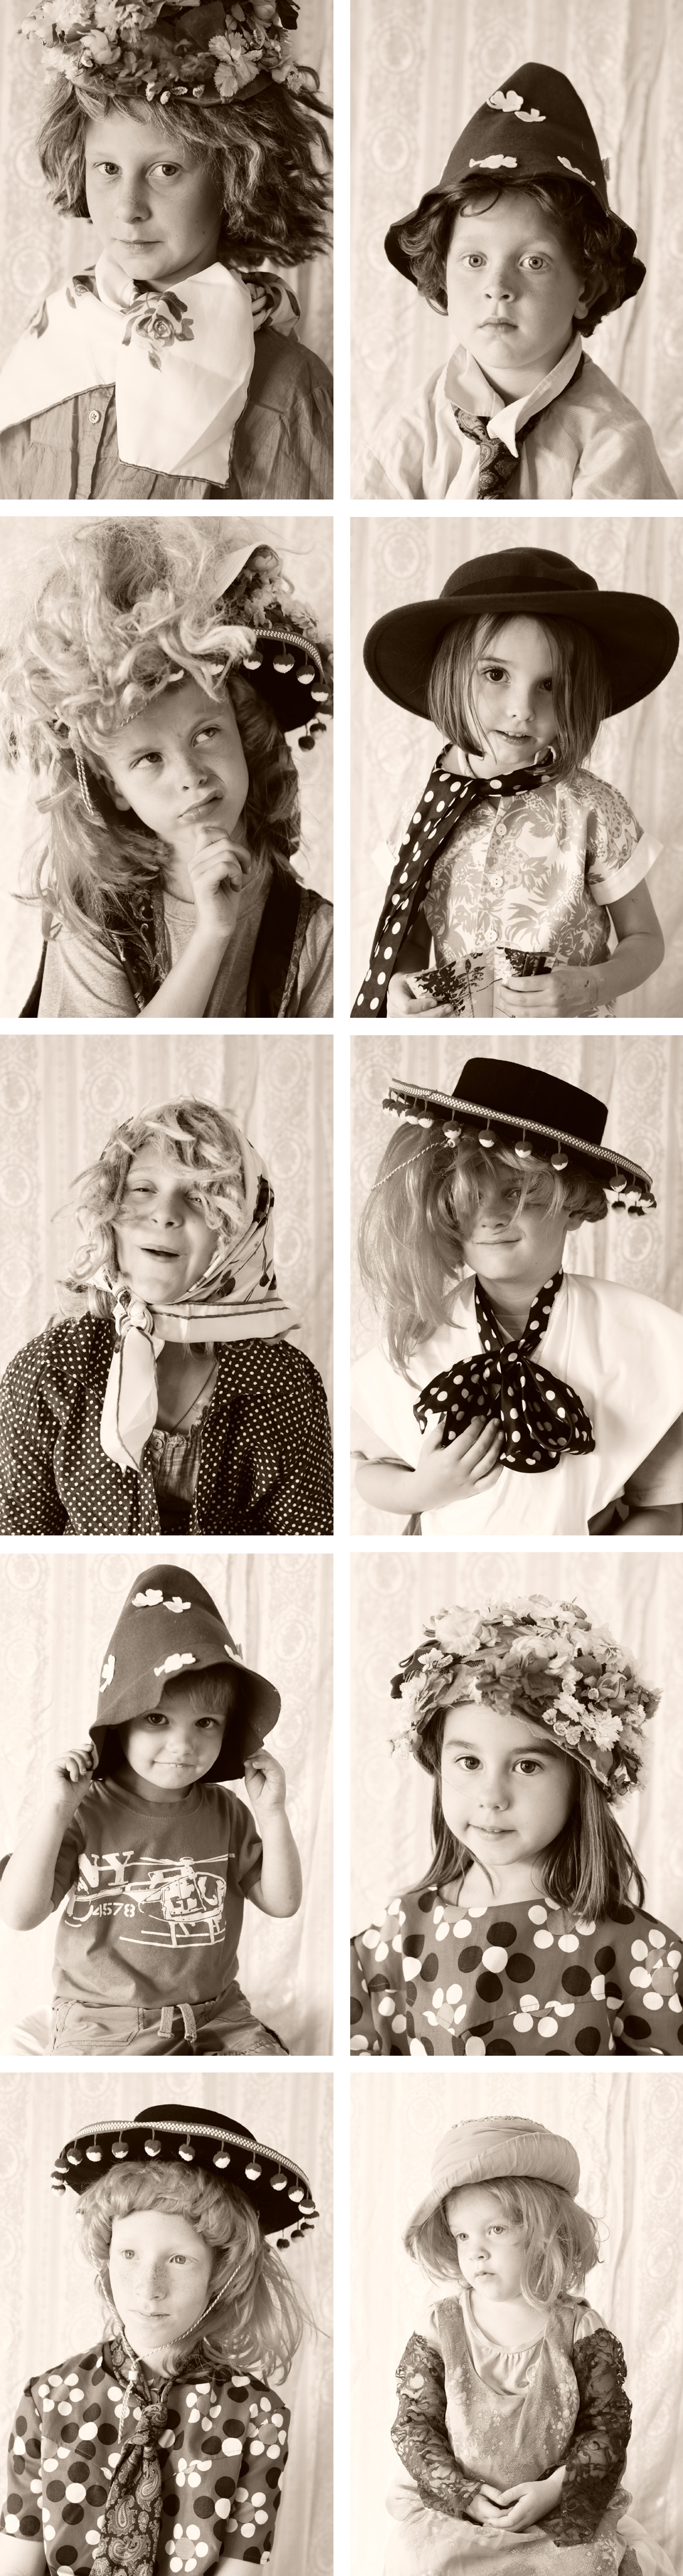 kid's dress-up photo-booth